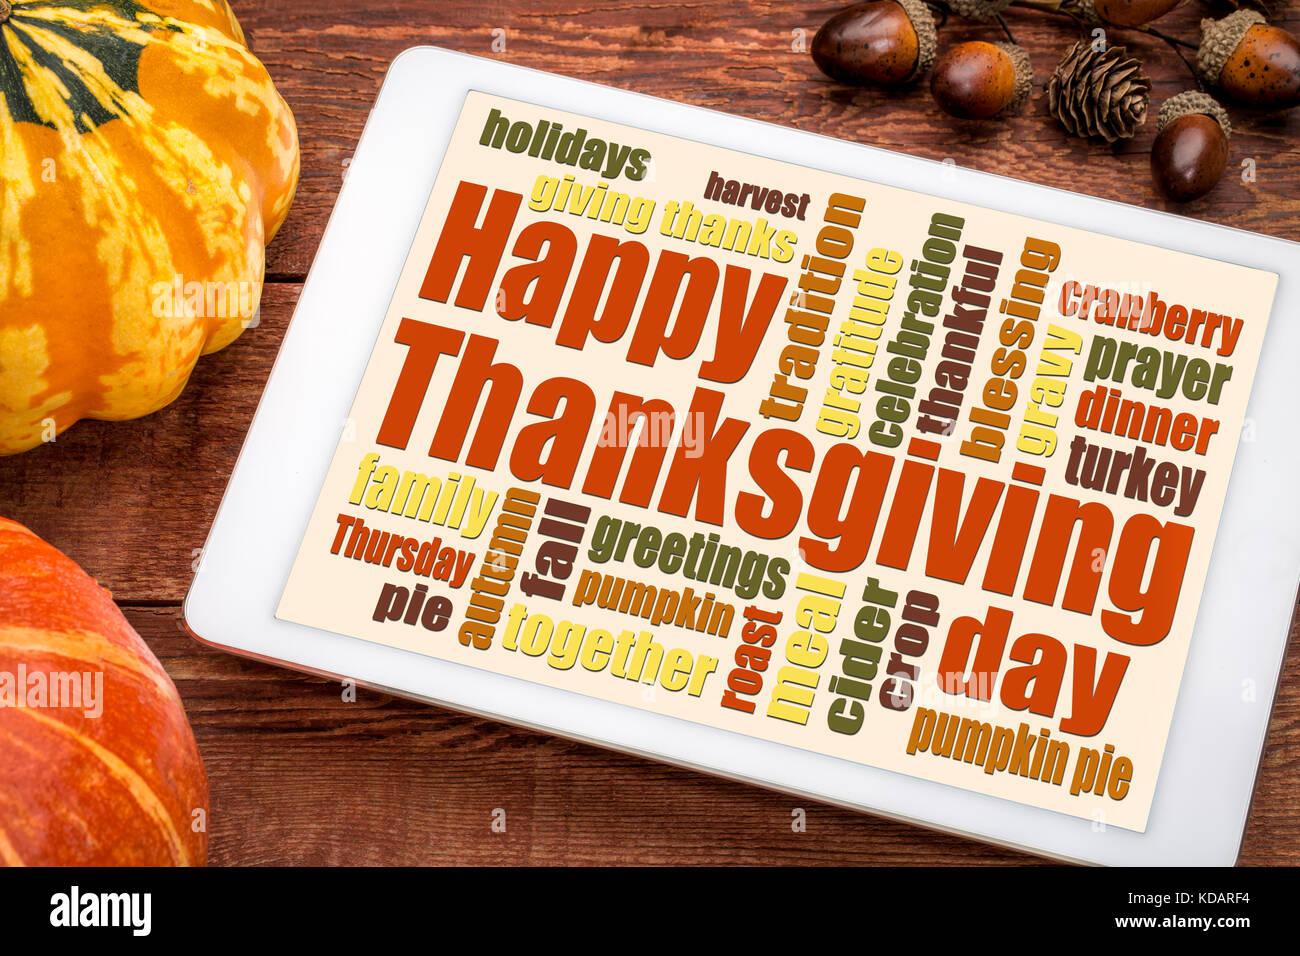 Happy Thanksgiving word cloud on a digital tablet with pumpkin and acorn decoration Stock Photo